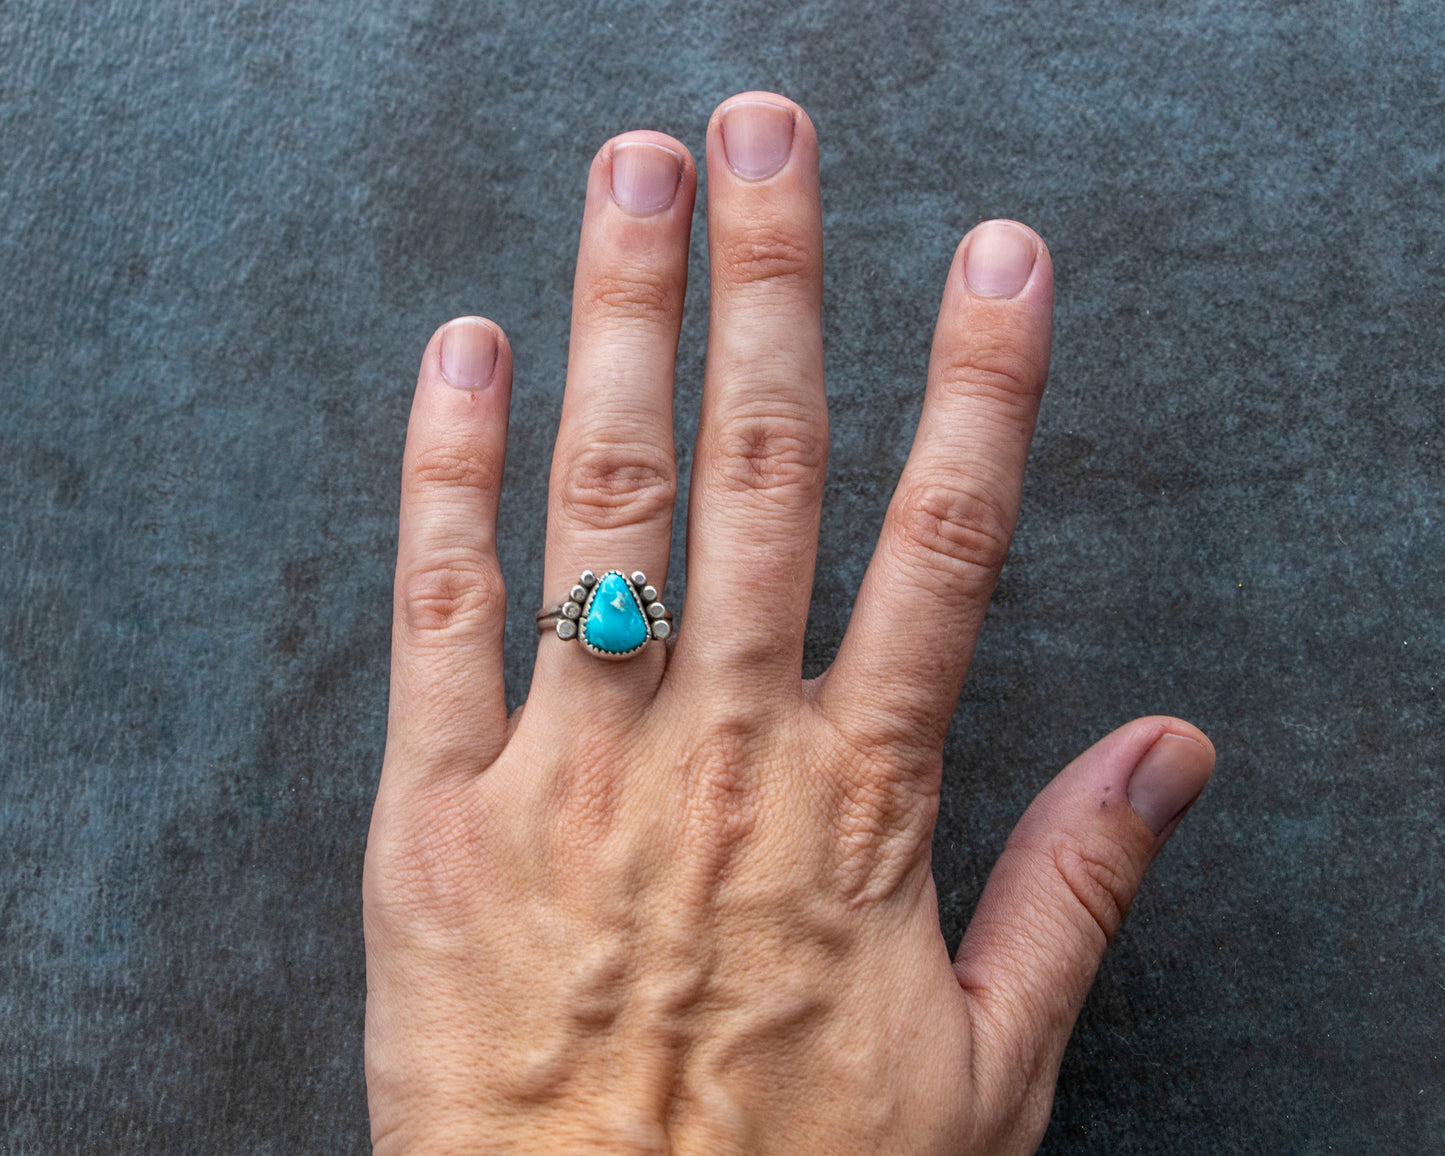 White Water Armored Turquoise Ring Size 6.5